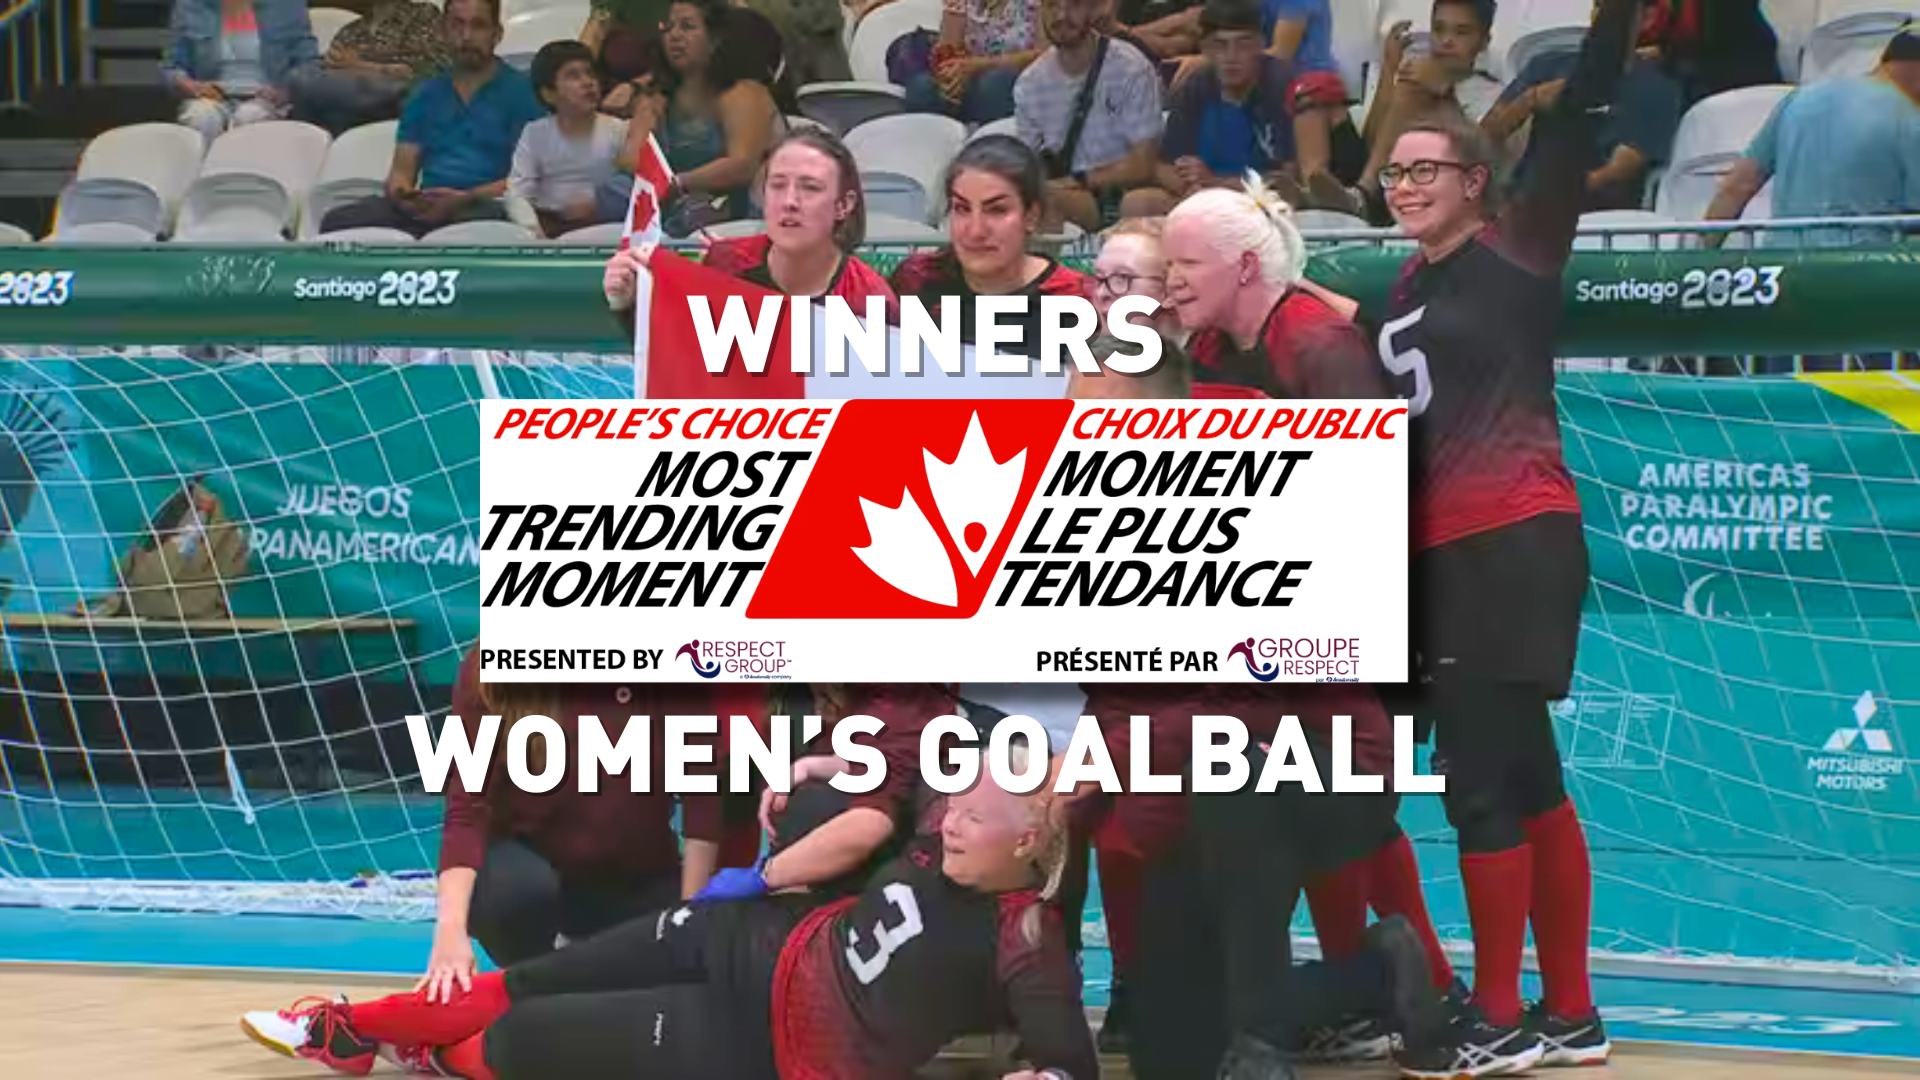 46th Canadian Sport Awards: Women’s Goalball Parapan American Games triumph named 2023 Most Trending Moment of the Year Presented by Respect Group